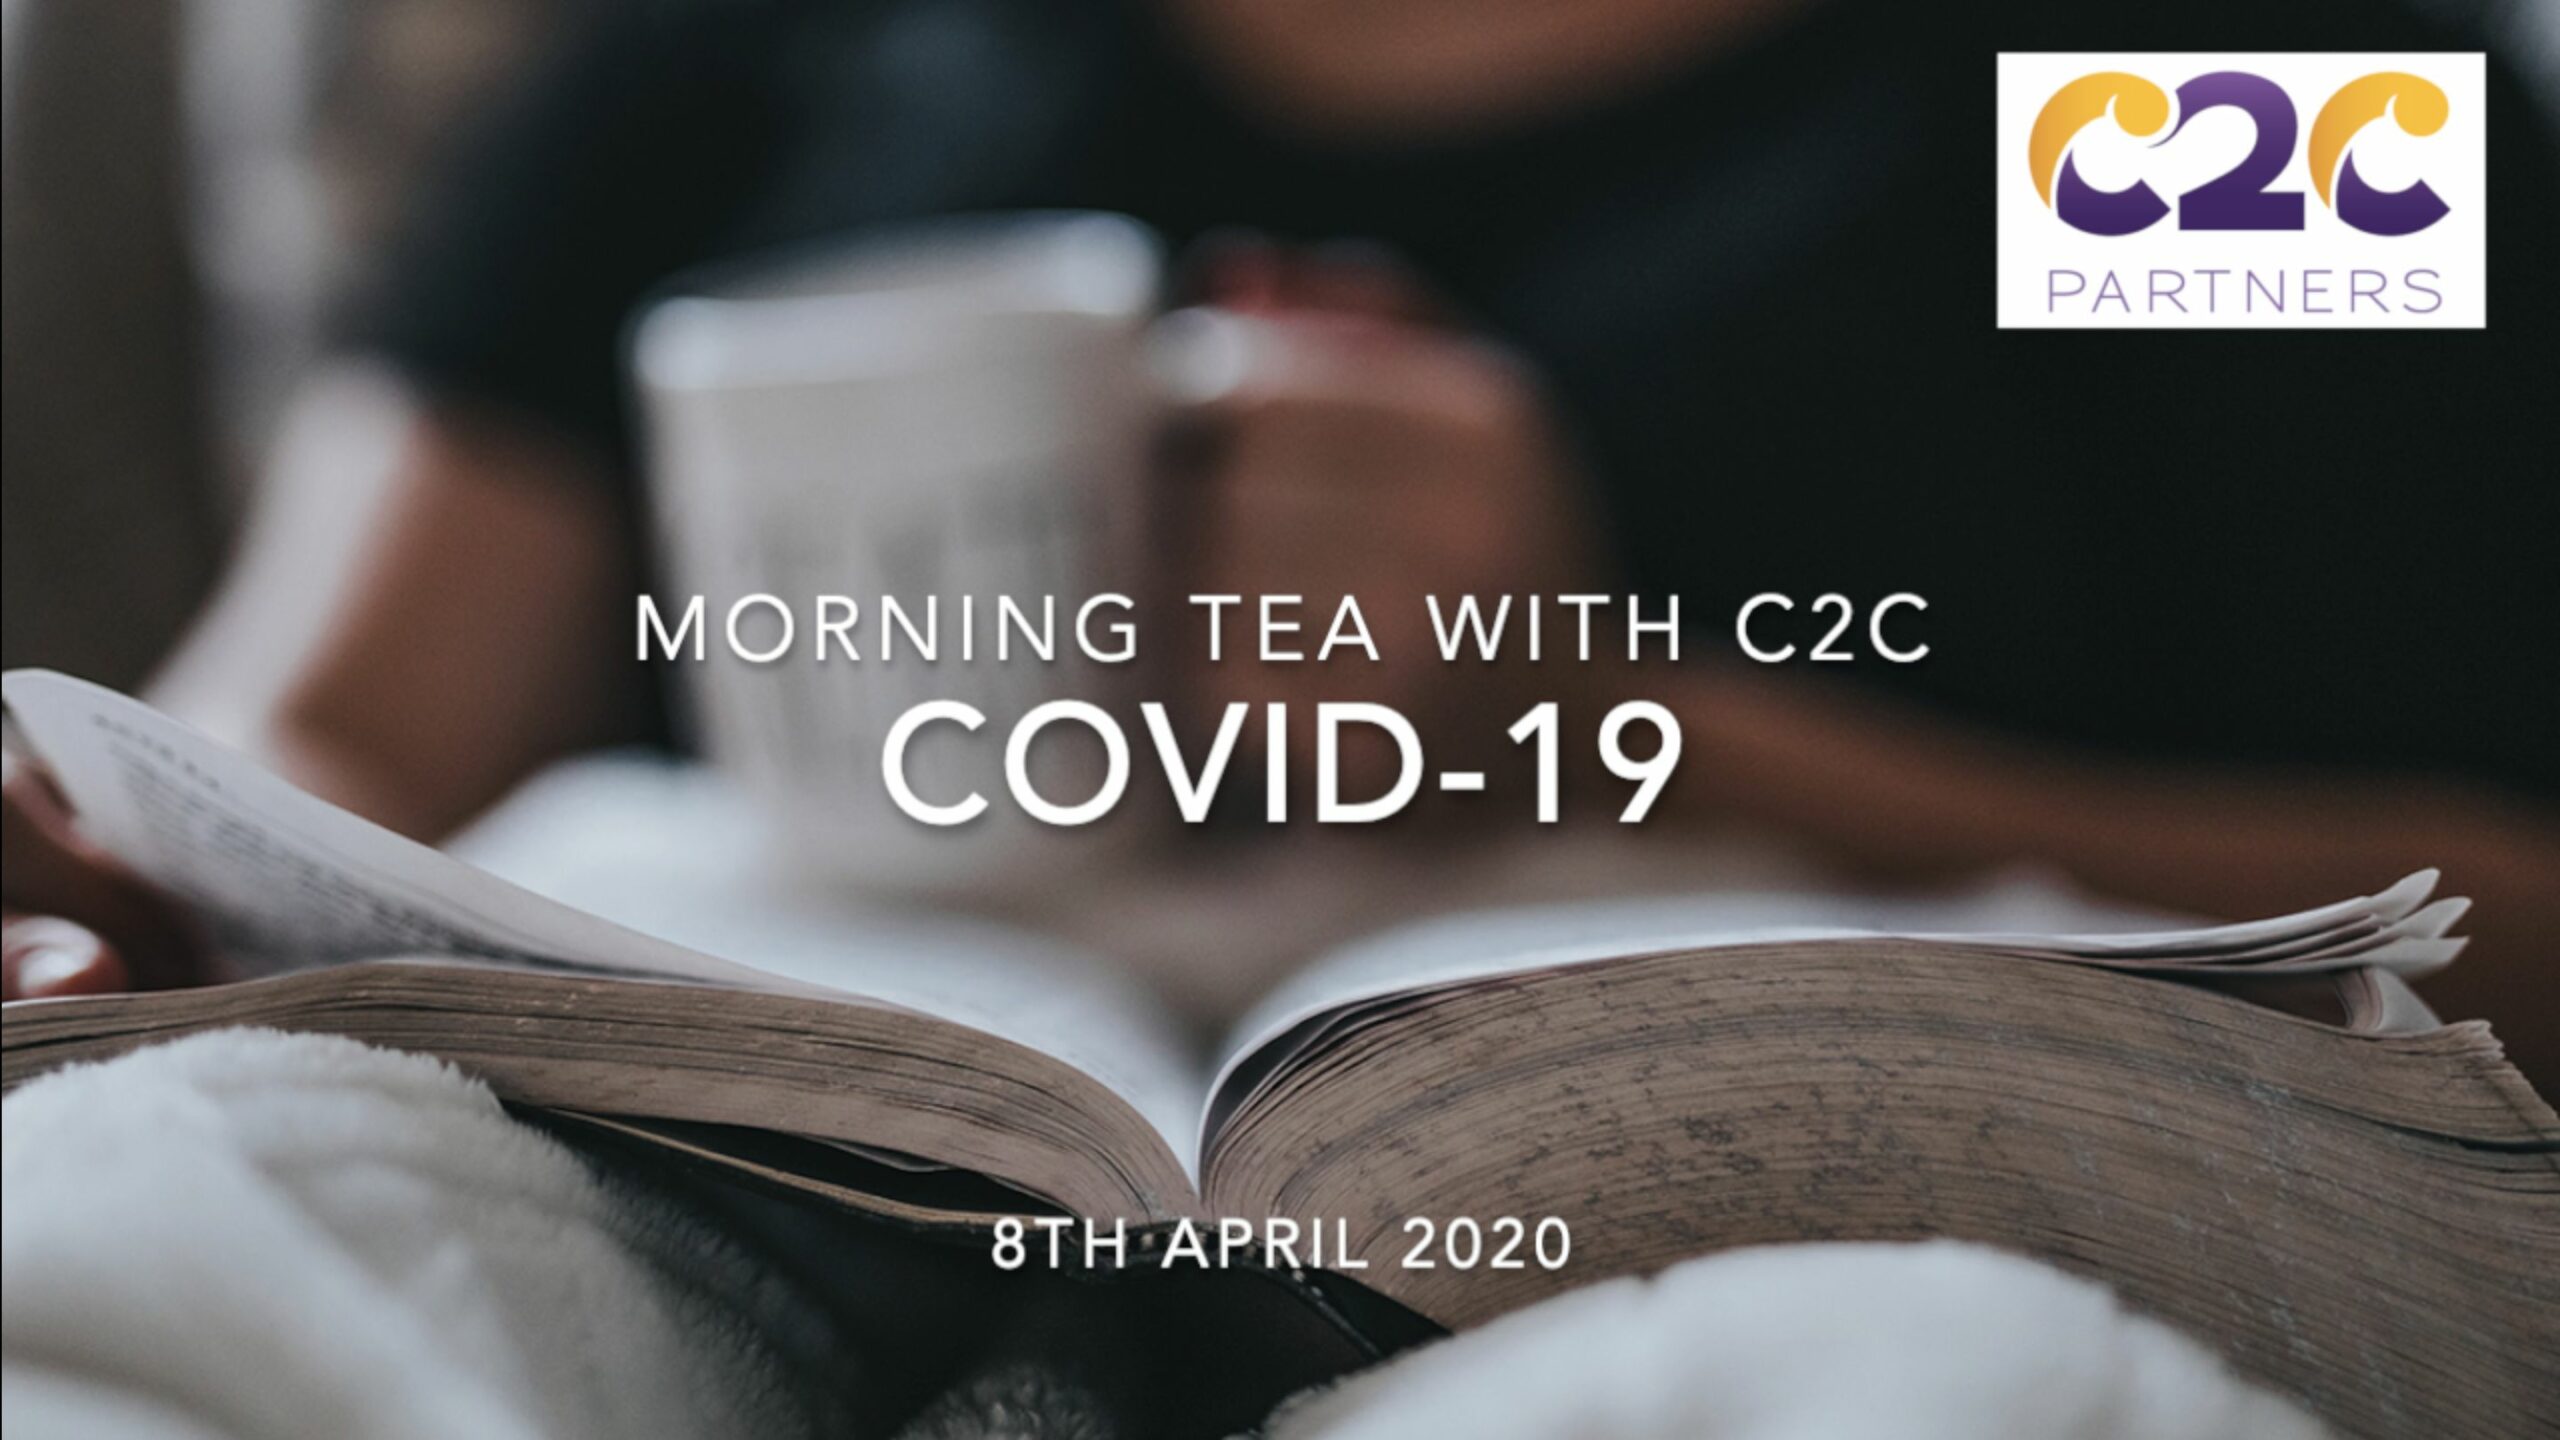 Morning Tea with C2C COVID-19